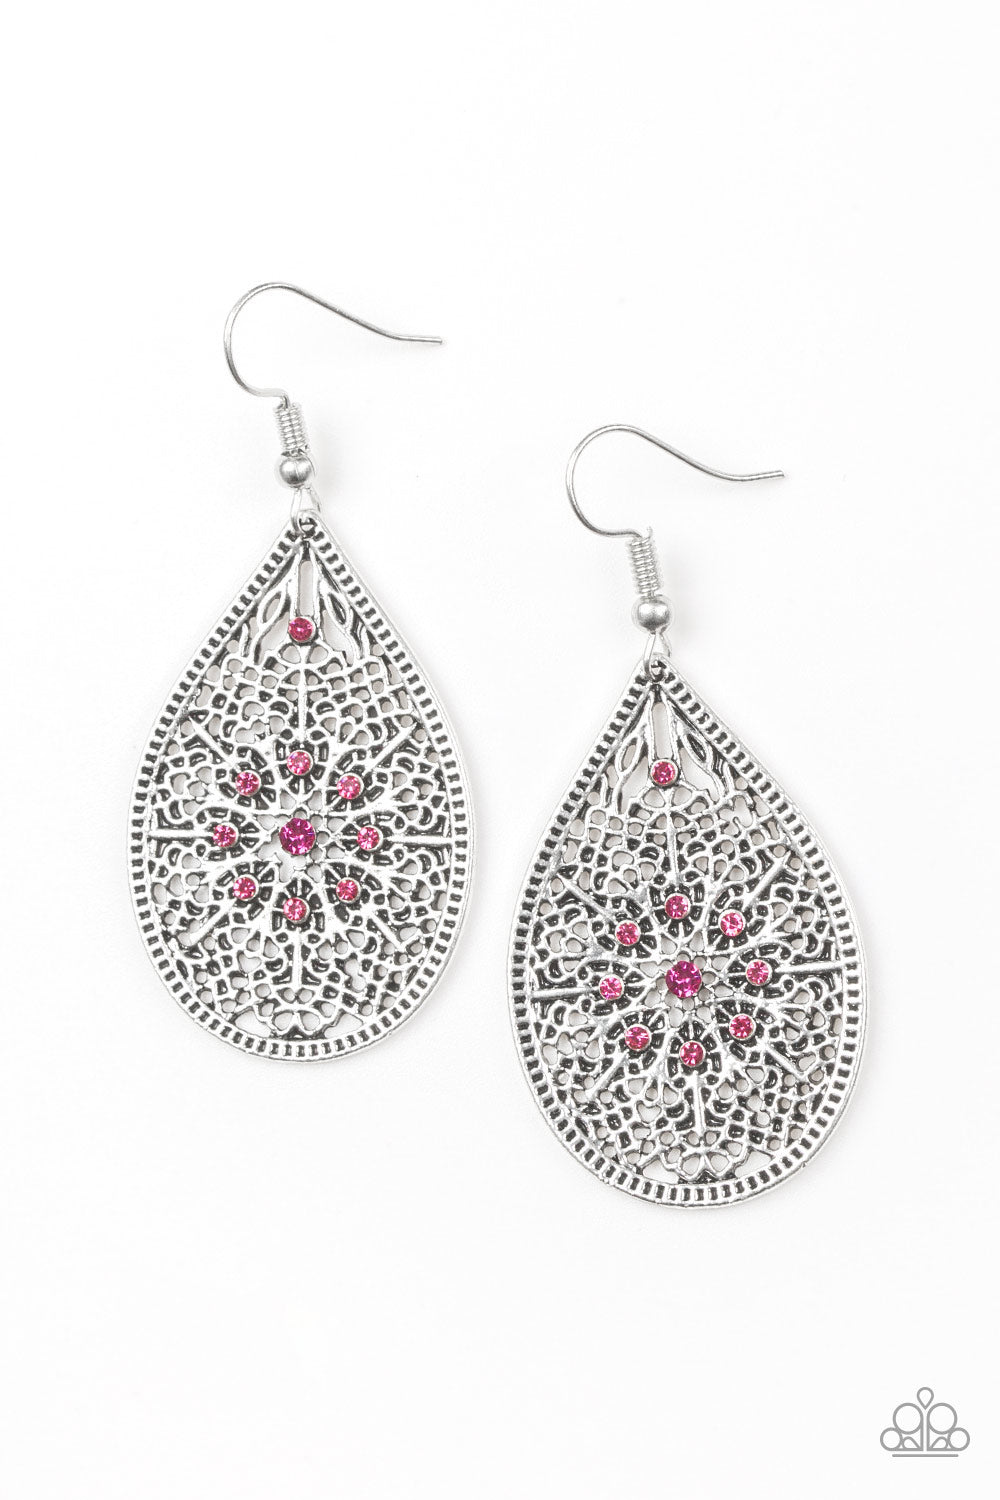 Paparazzi Accessories - Dinner Party Posh - Pink Earrings - Alies Bling Bar